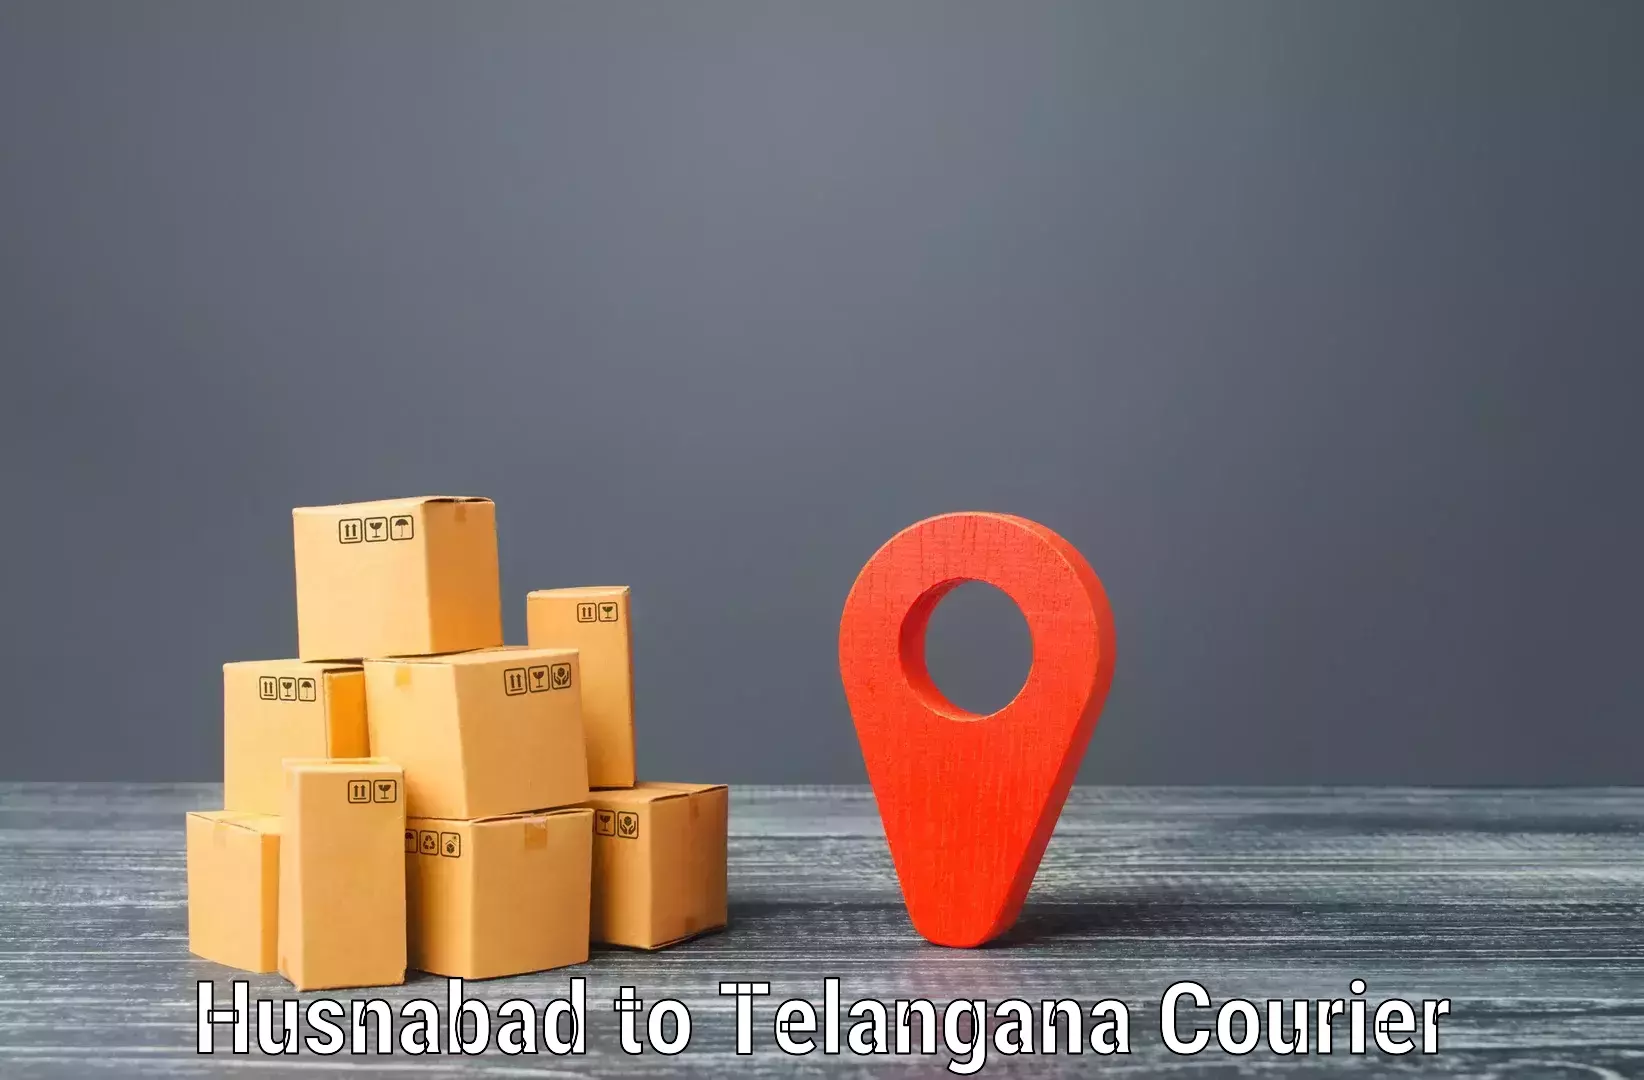 Flexible delivery schedules in Husnabad to Gangadhara